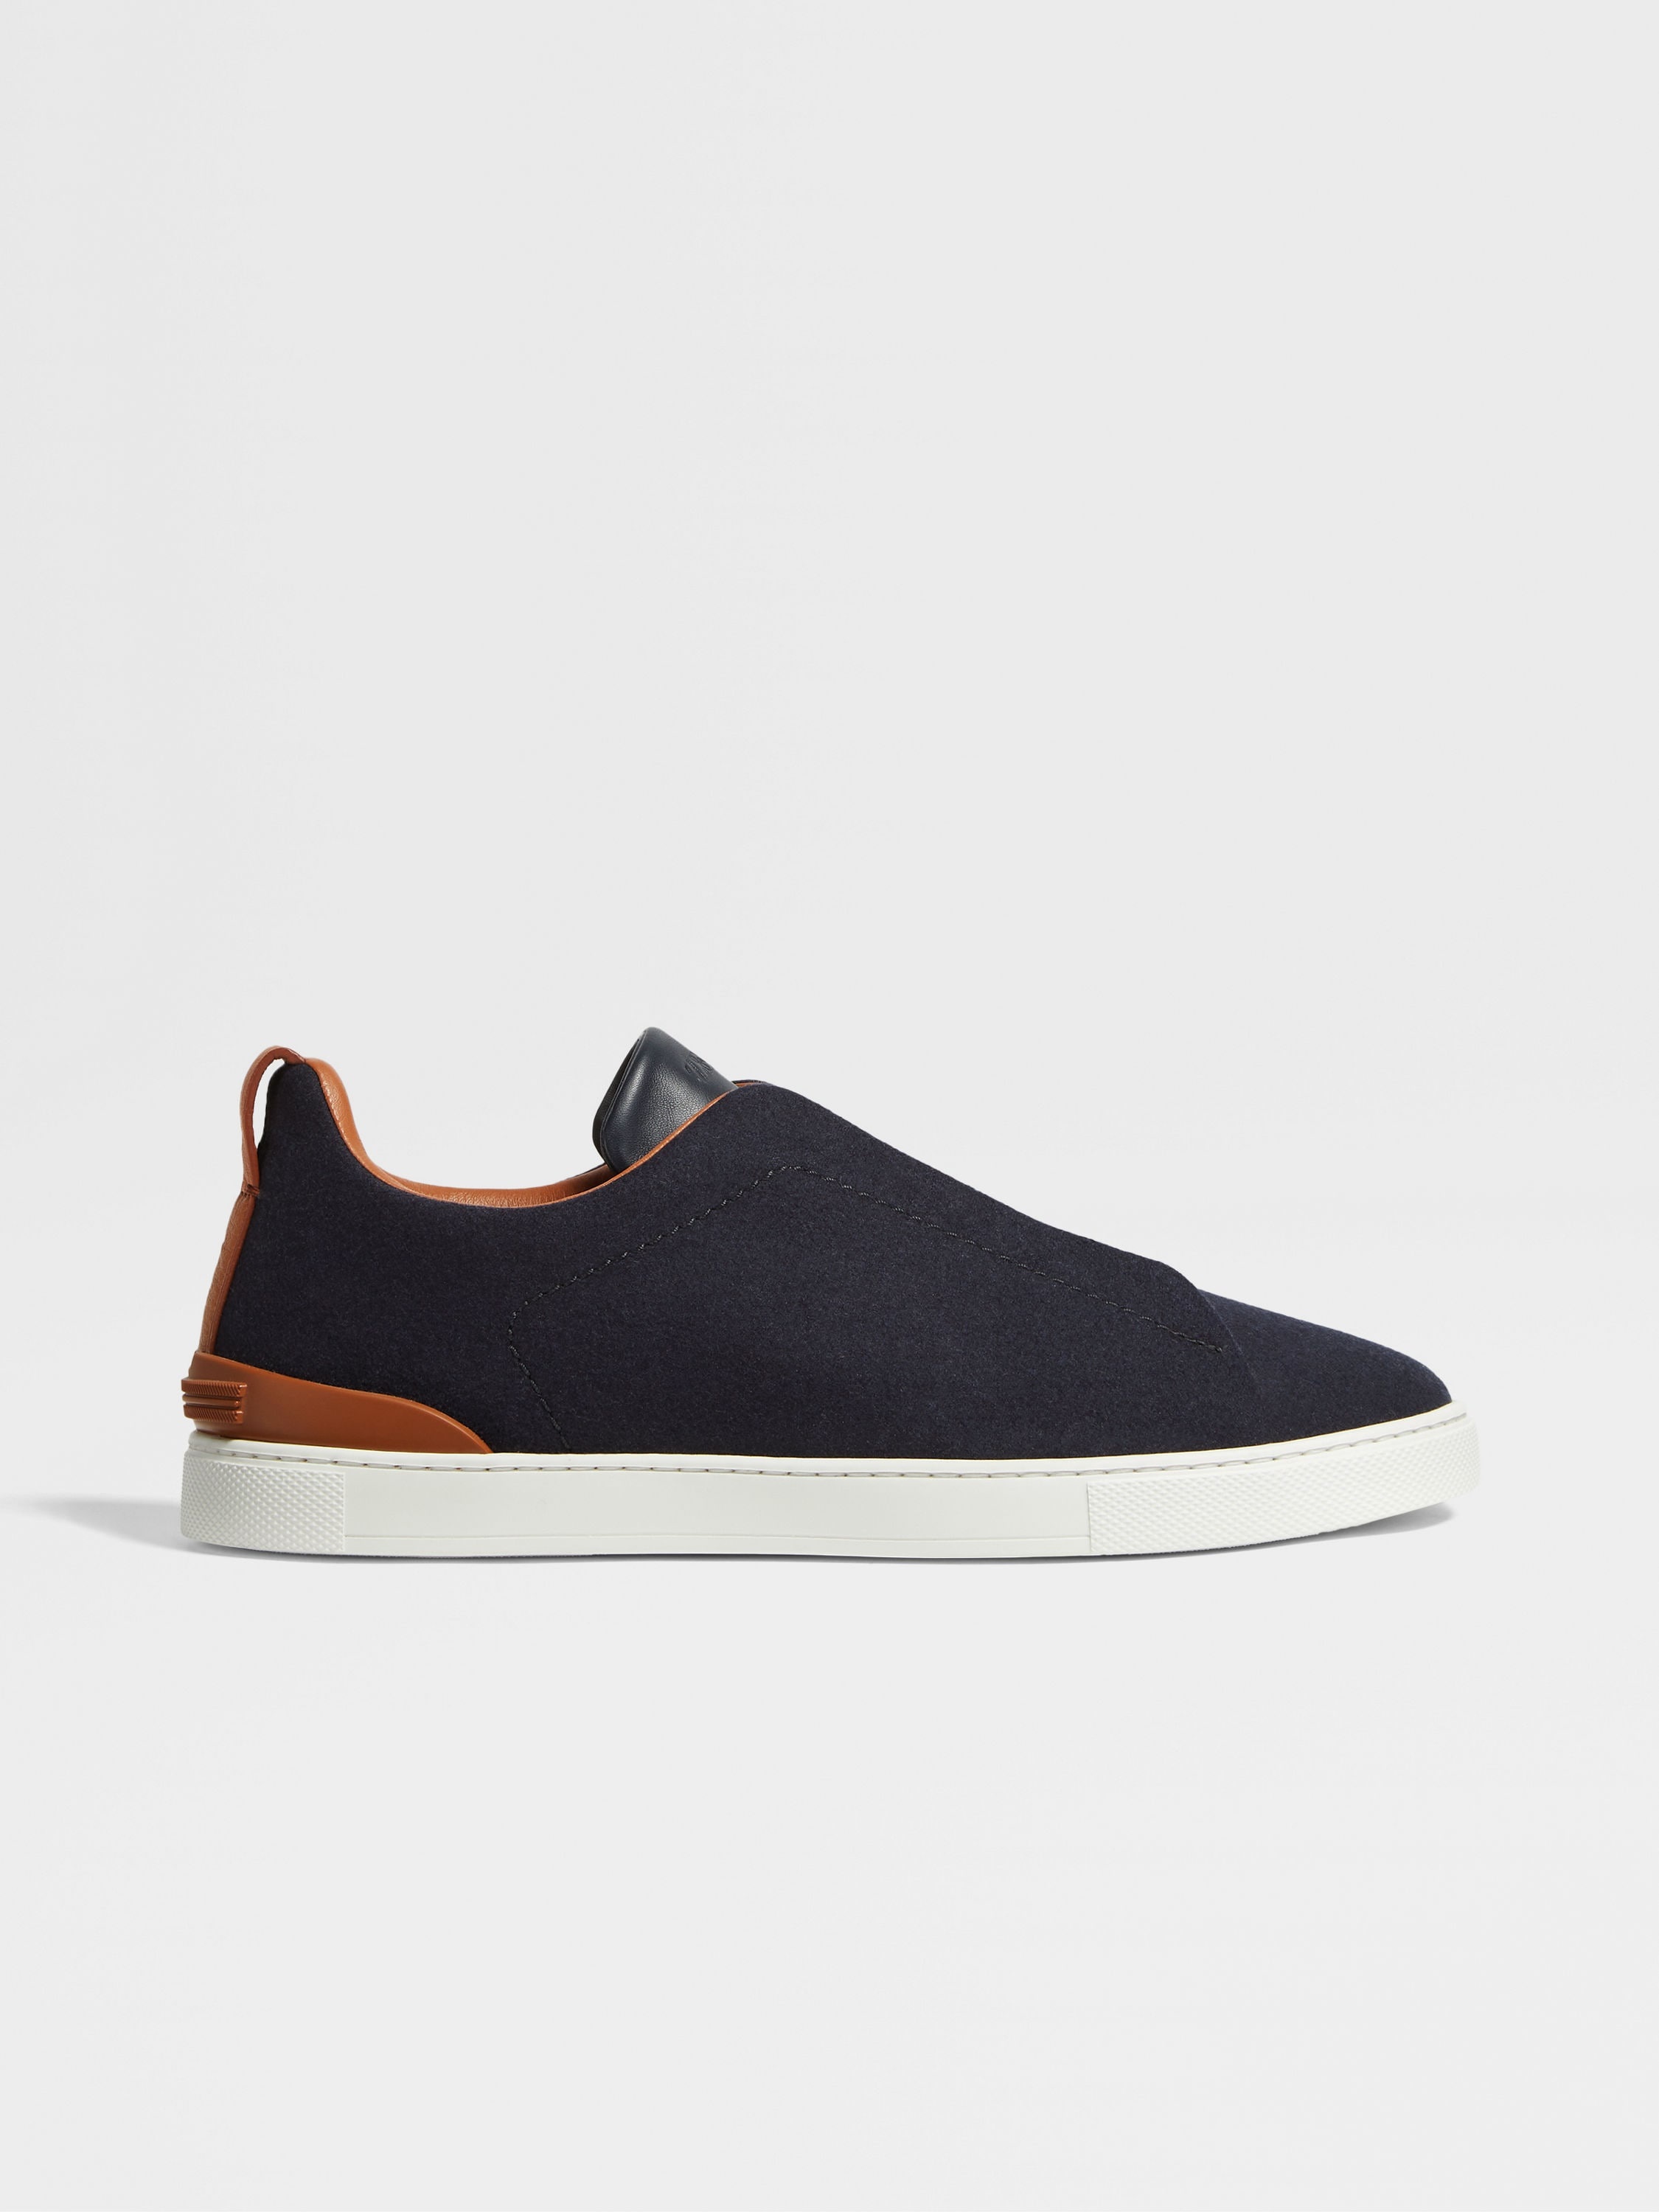 NAVY BLUE #USETHEEXISTING™ WOOL TRIPLE STITCH™ SNEAKERS - 4